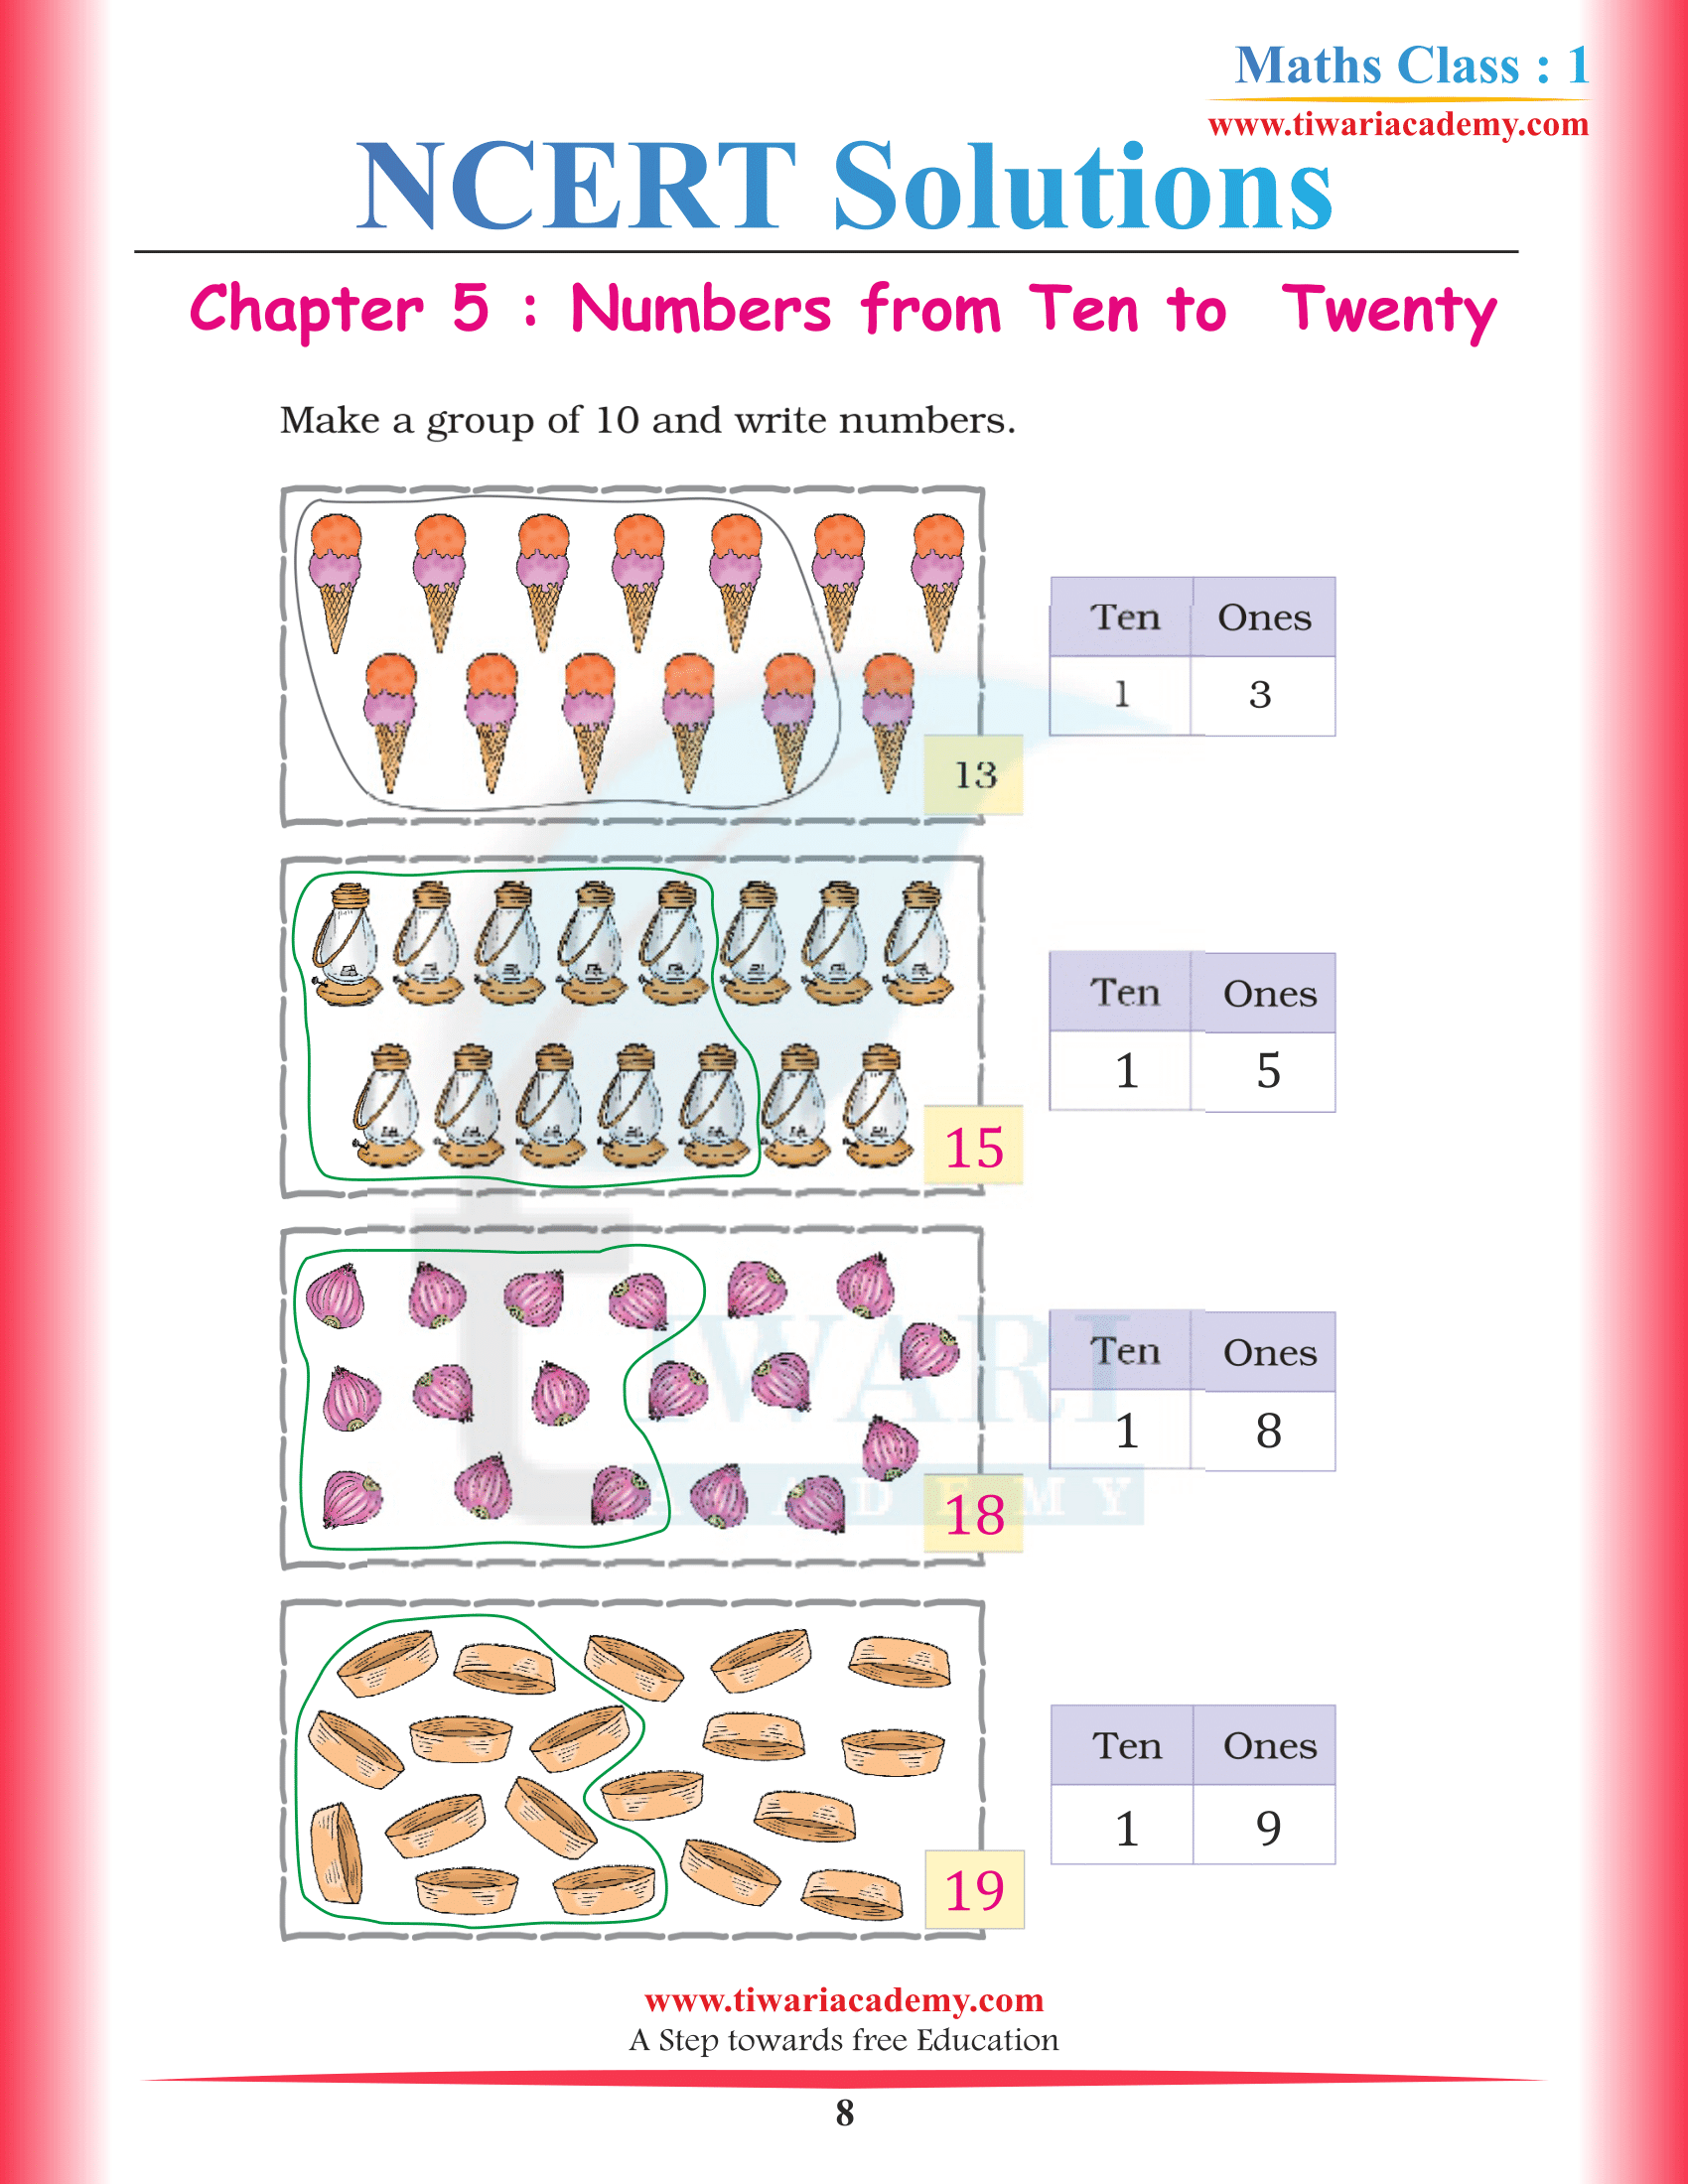 NCERT Solutions for Class 1 Maths Chapter 5 in PDF